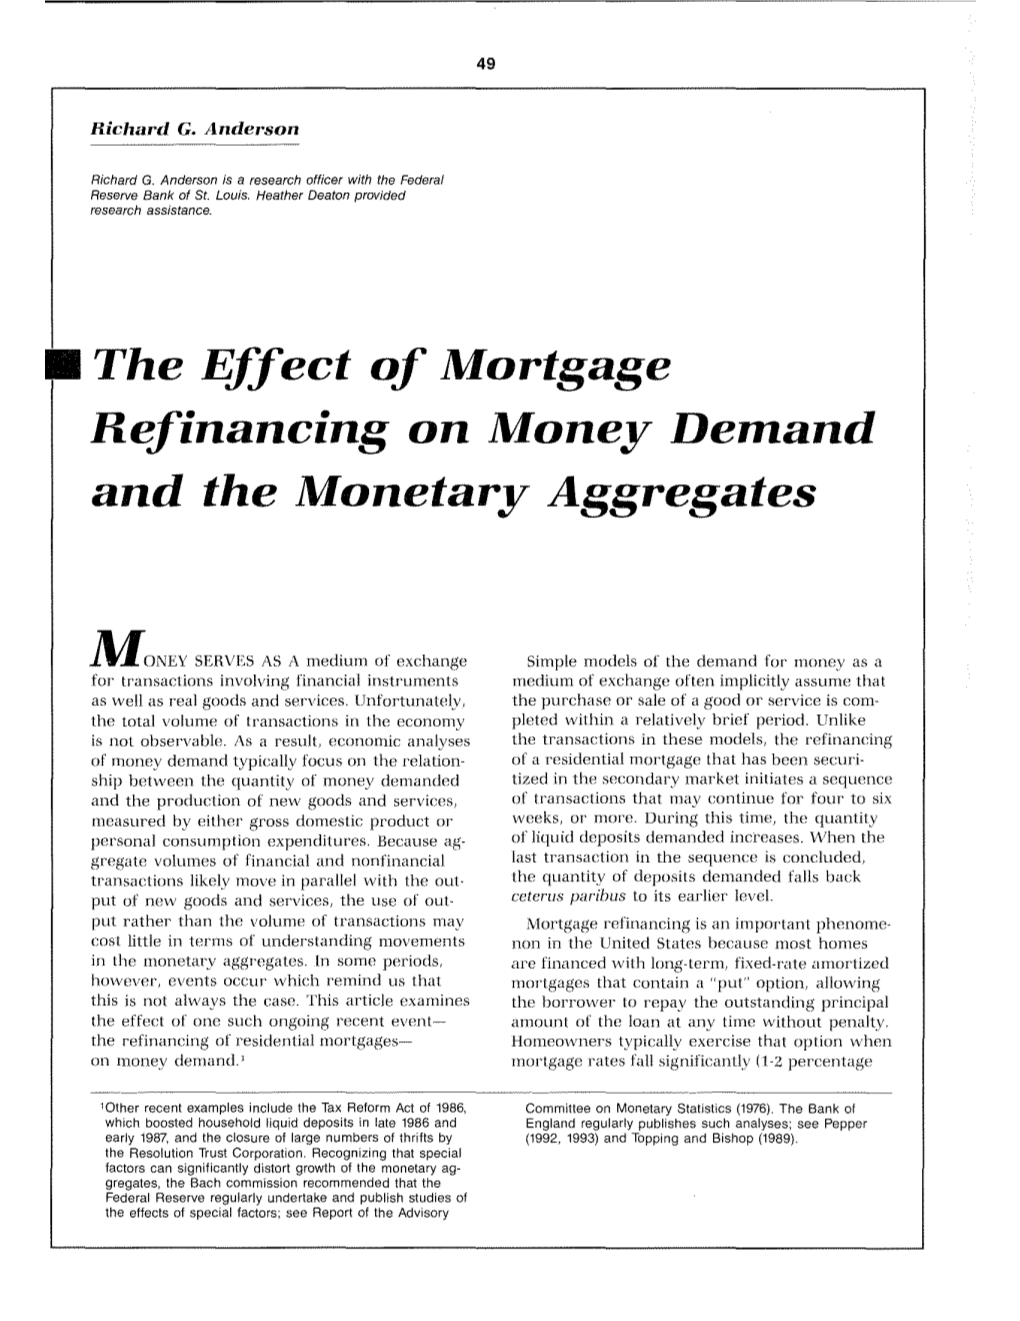 The Effect of Mortgage Refinancing on Money Demand and the Monetary Aggregates